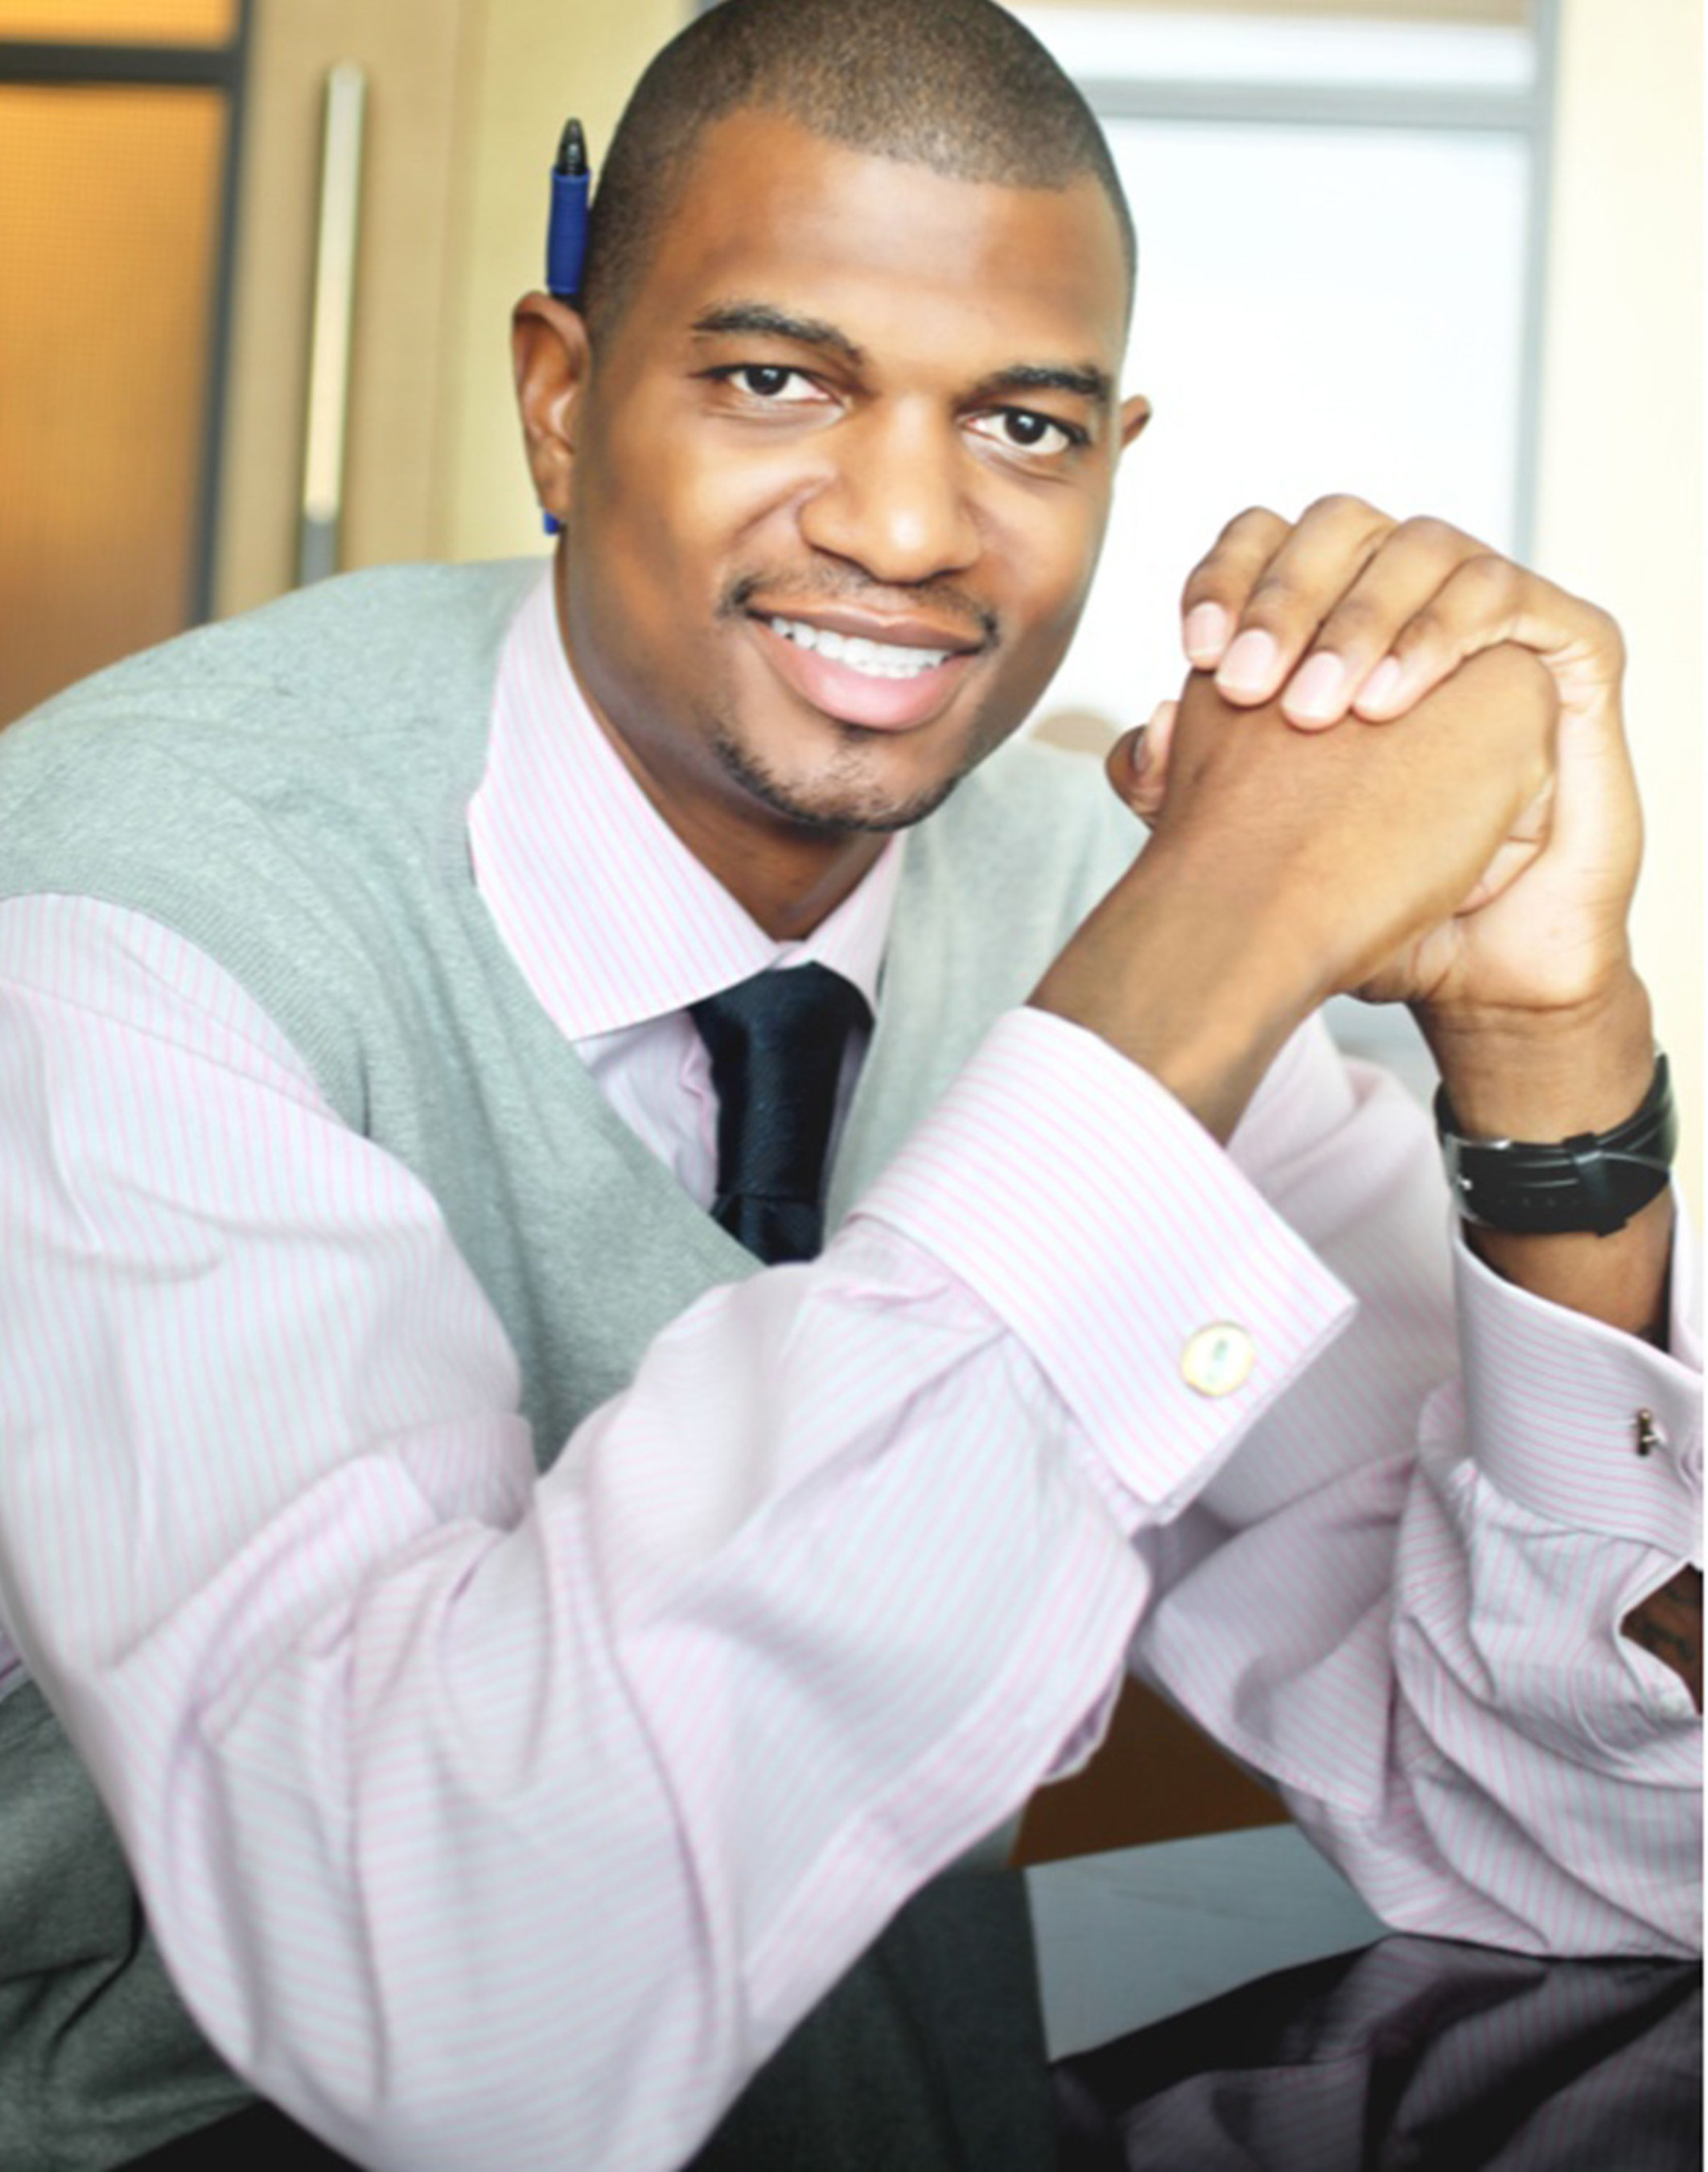 Jonathan Bender, former NBA player and rising-star in the medtech industry, will speak at MD&M West, February 11, 2015 at the Anaheim Convention Center